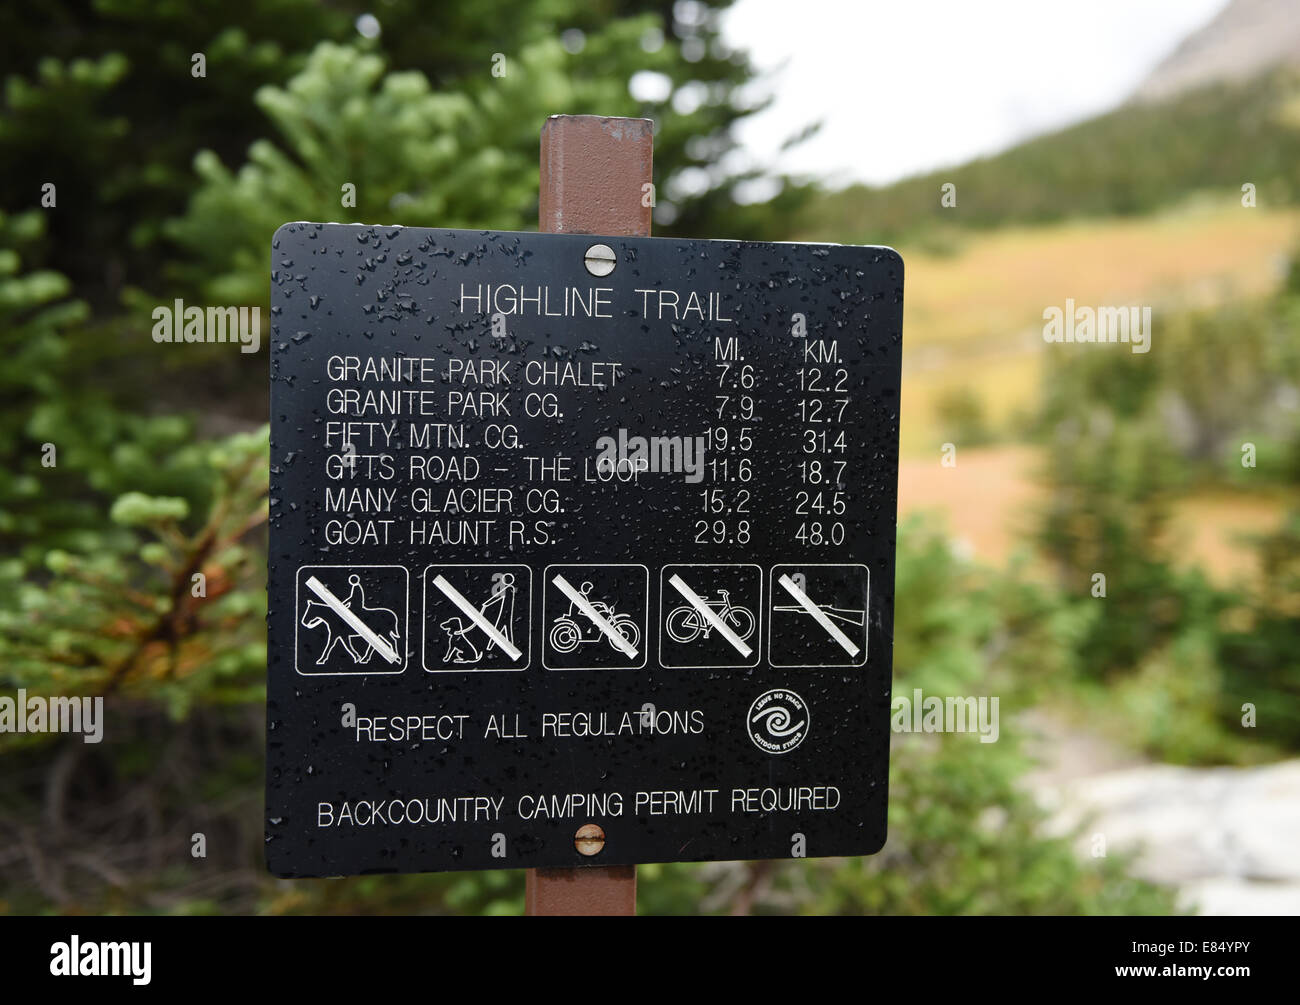 National Park Service sign with mileage and rules at the start of the Highline Trail in Glacier National Park, Montana. Stock Photo